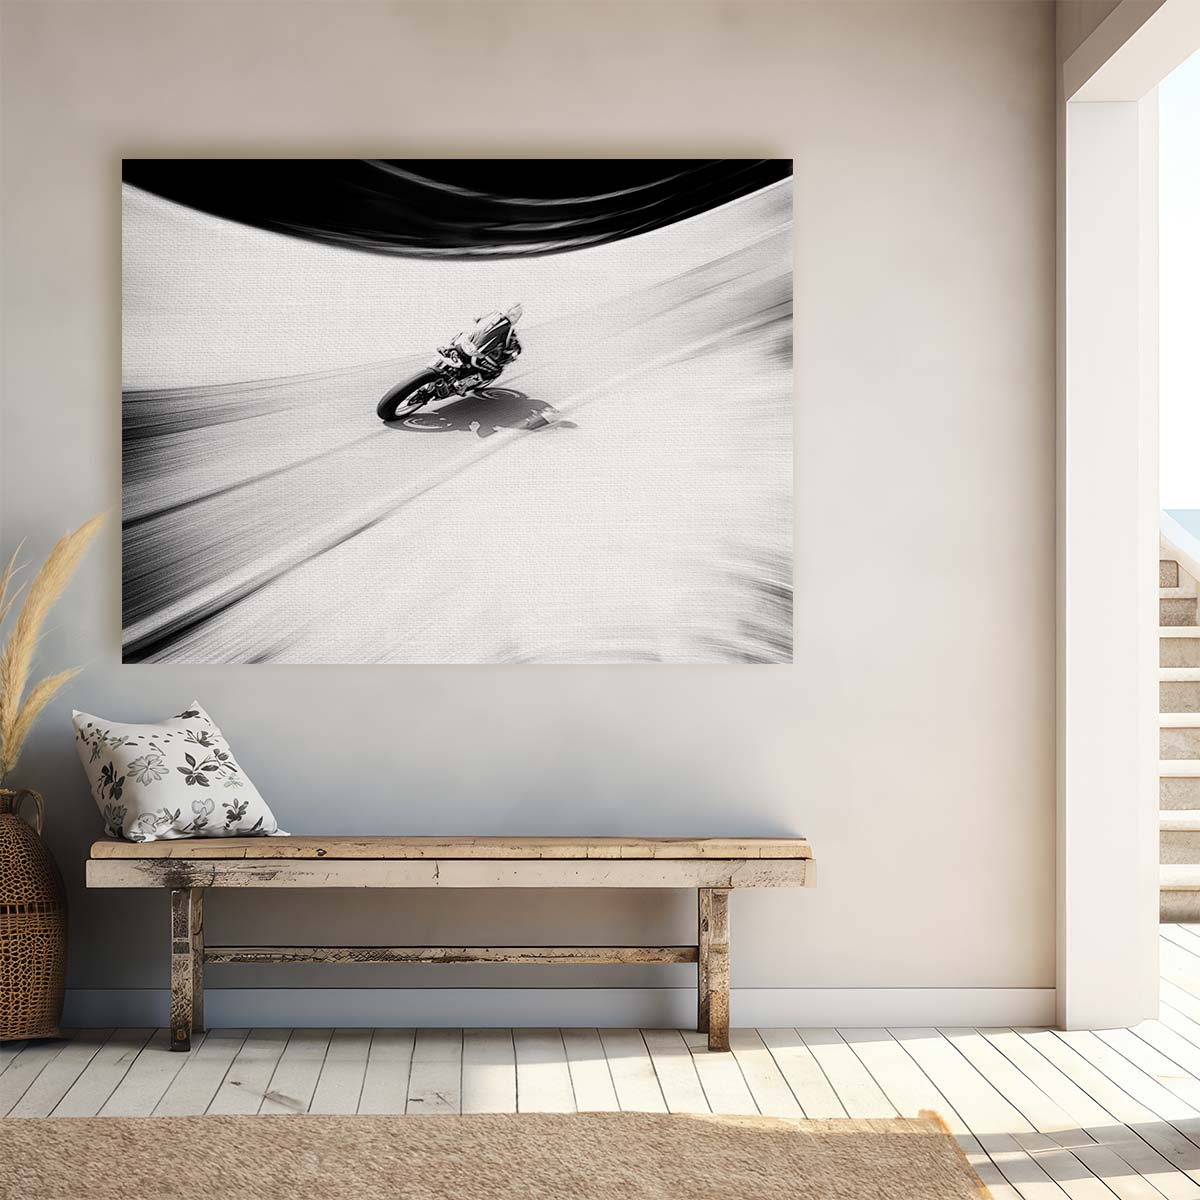 Speeding Motorcycles Race, Monochrome Action Wall Art by Luxuriance Designs. Made in USA.